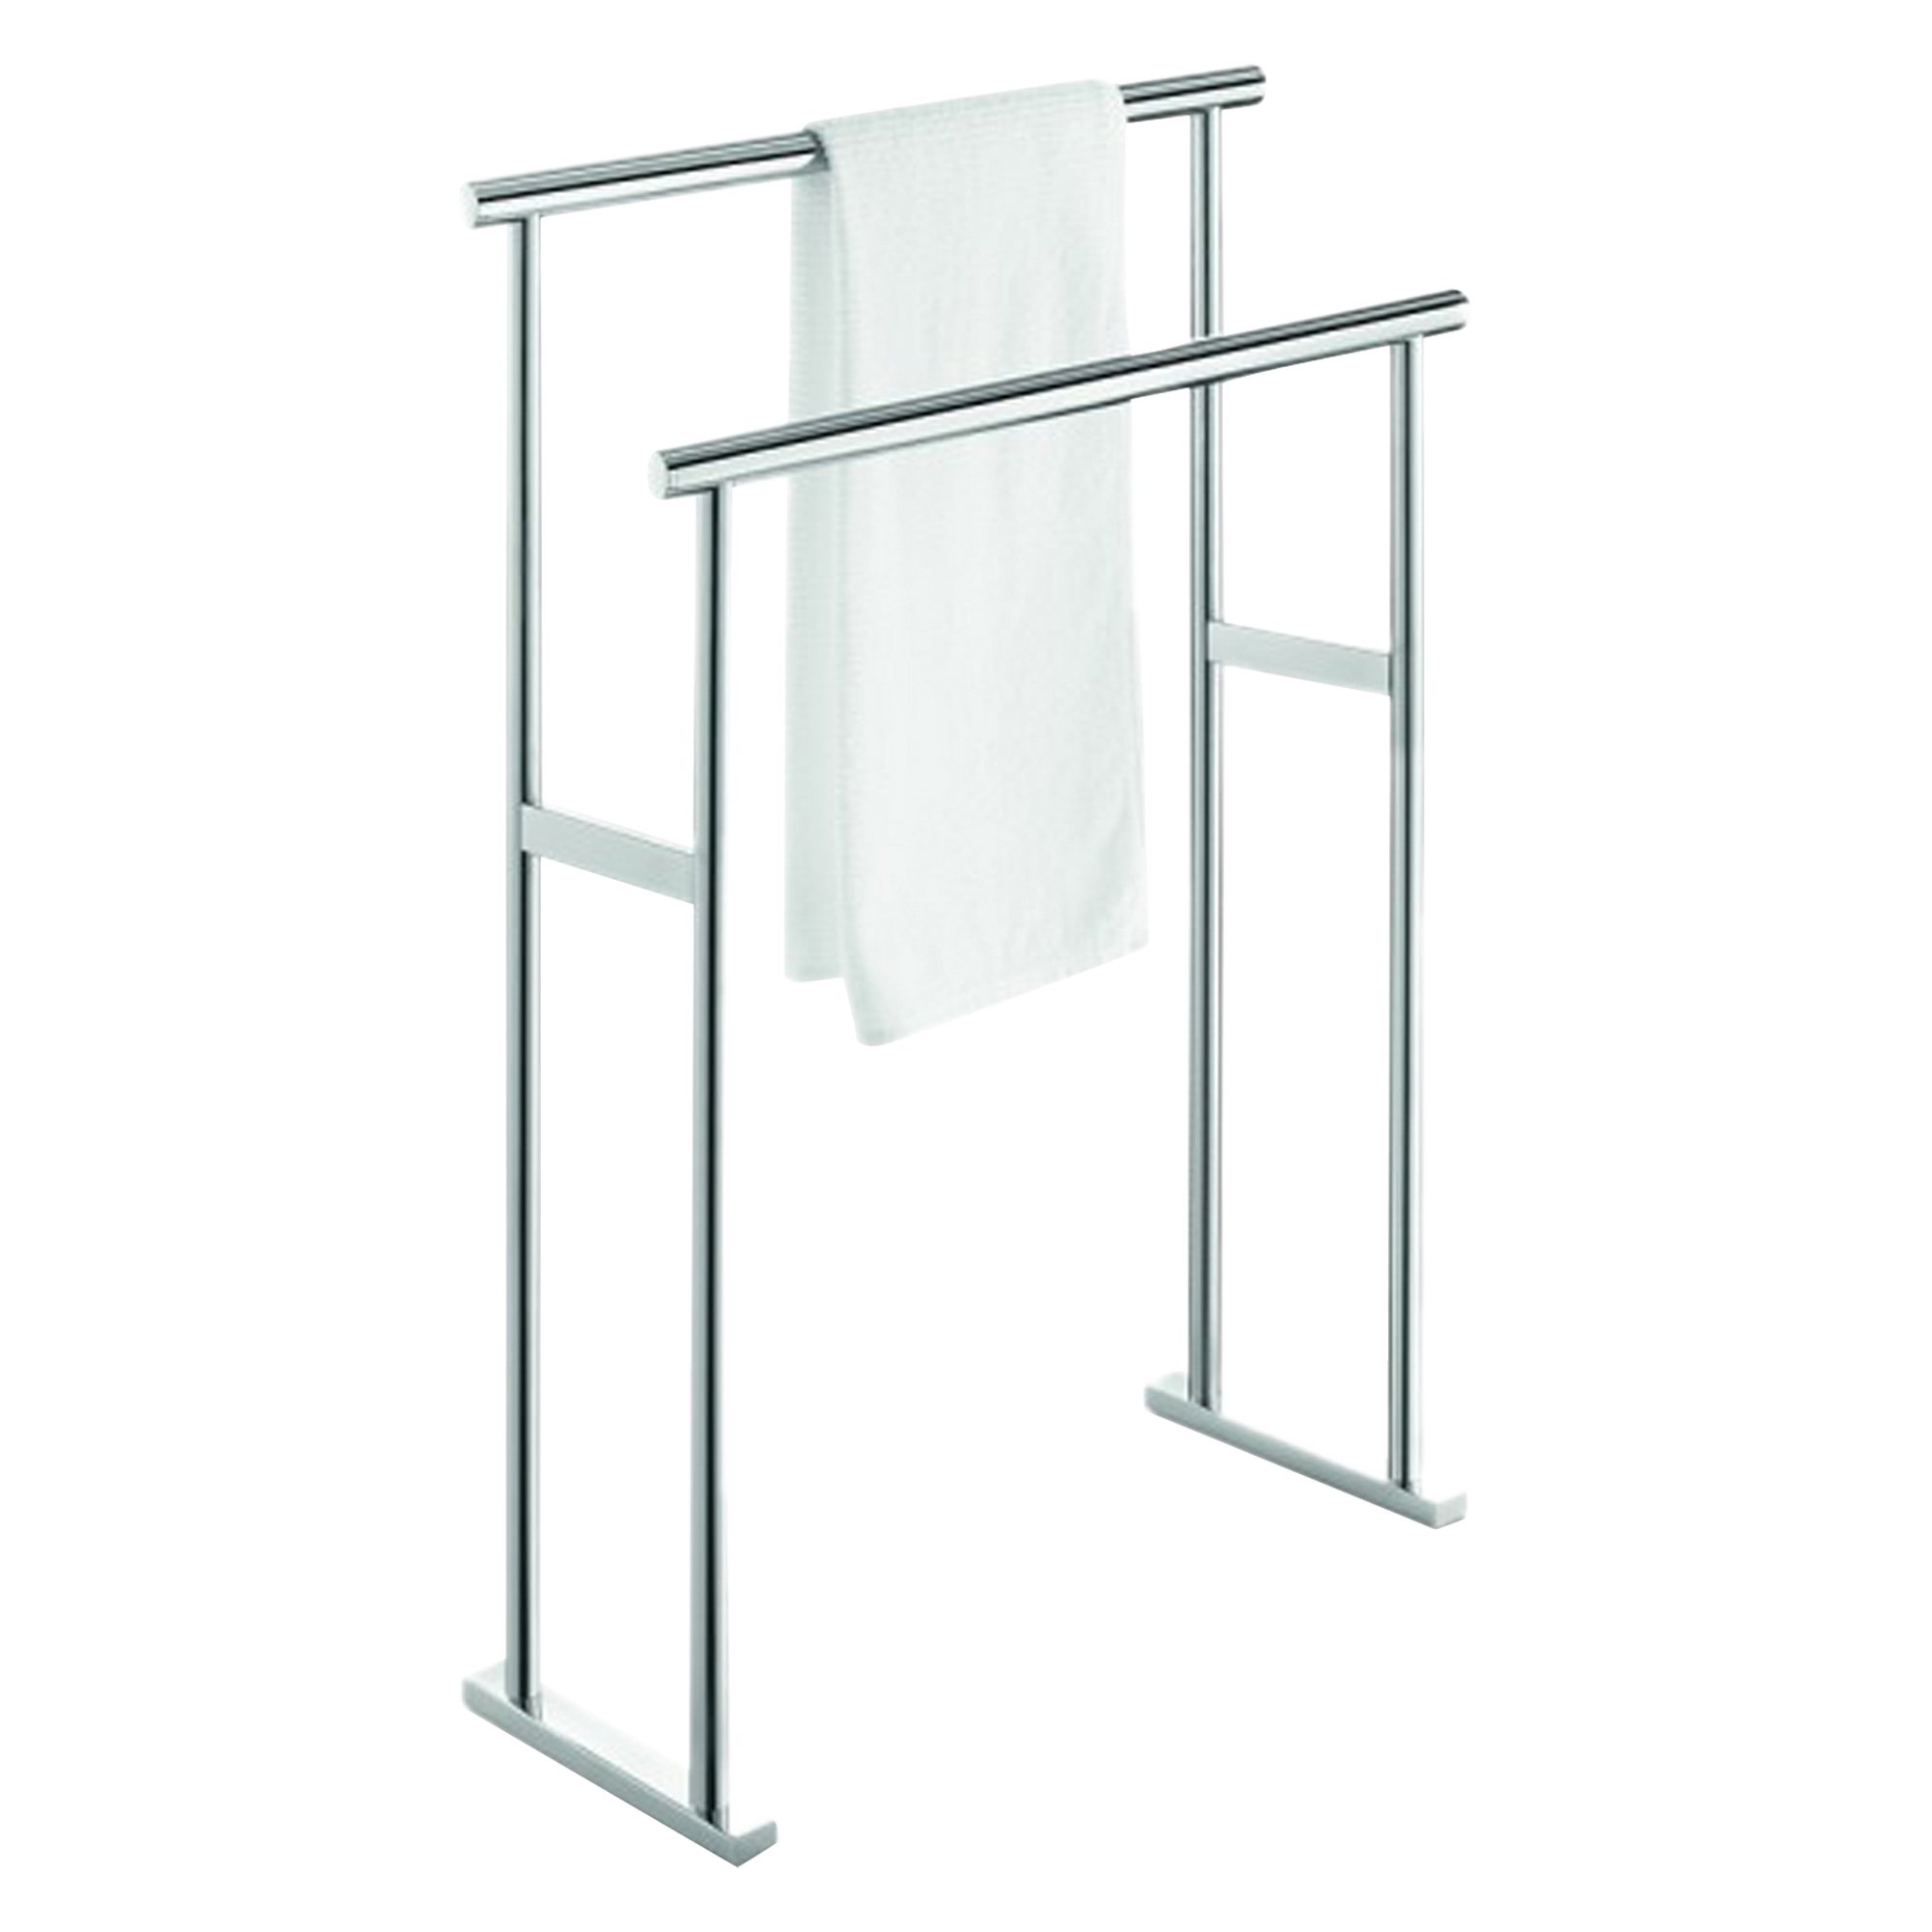 The Freestanding towel rack is a sleek and stylish piece designed with a glistening finish that adds a beautiful shine to the bathroom.